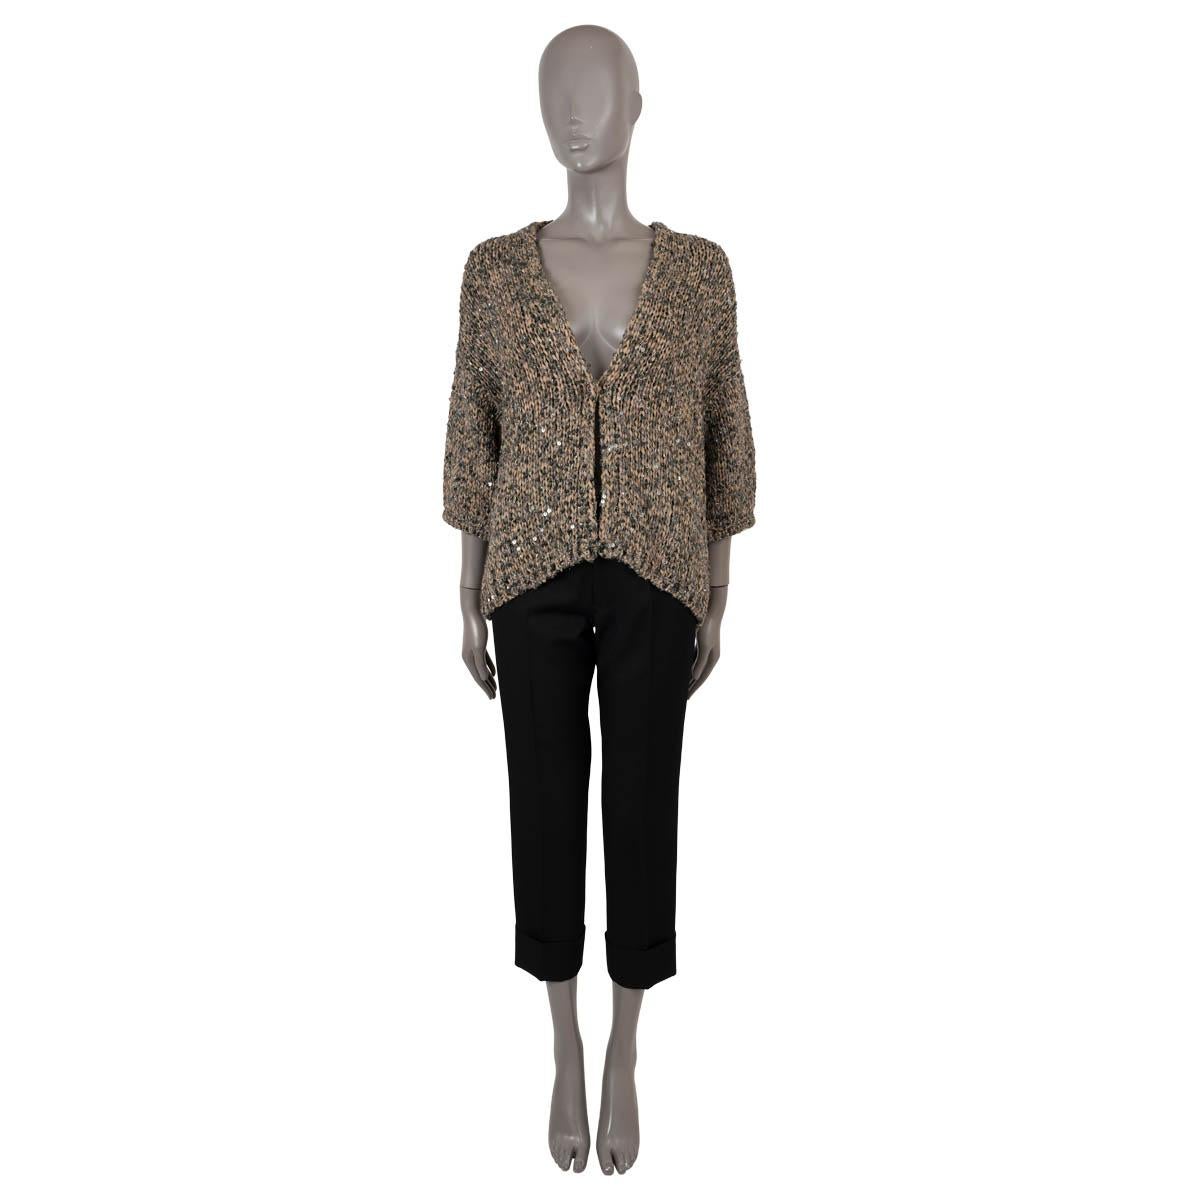 100% authentic Brunello Cucinelli chunky knit oversized cardigan in beige and olive green polyester  (38%), cotton (24%),viscose (20%), polyamide (15%), polyester (3%). Features 3/4 sleeves, dropped shoulders and is embellished with olive green